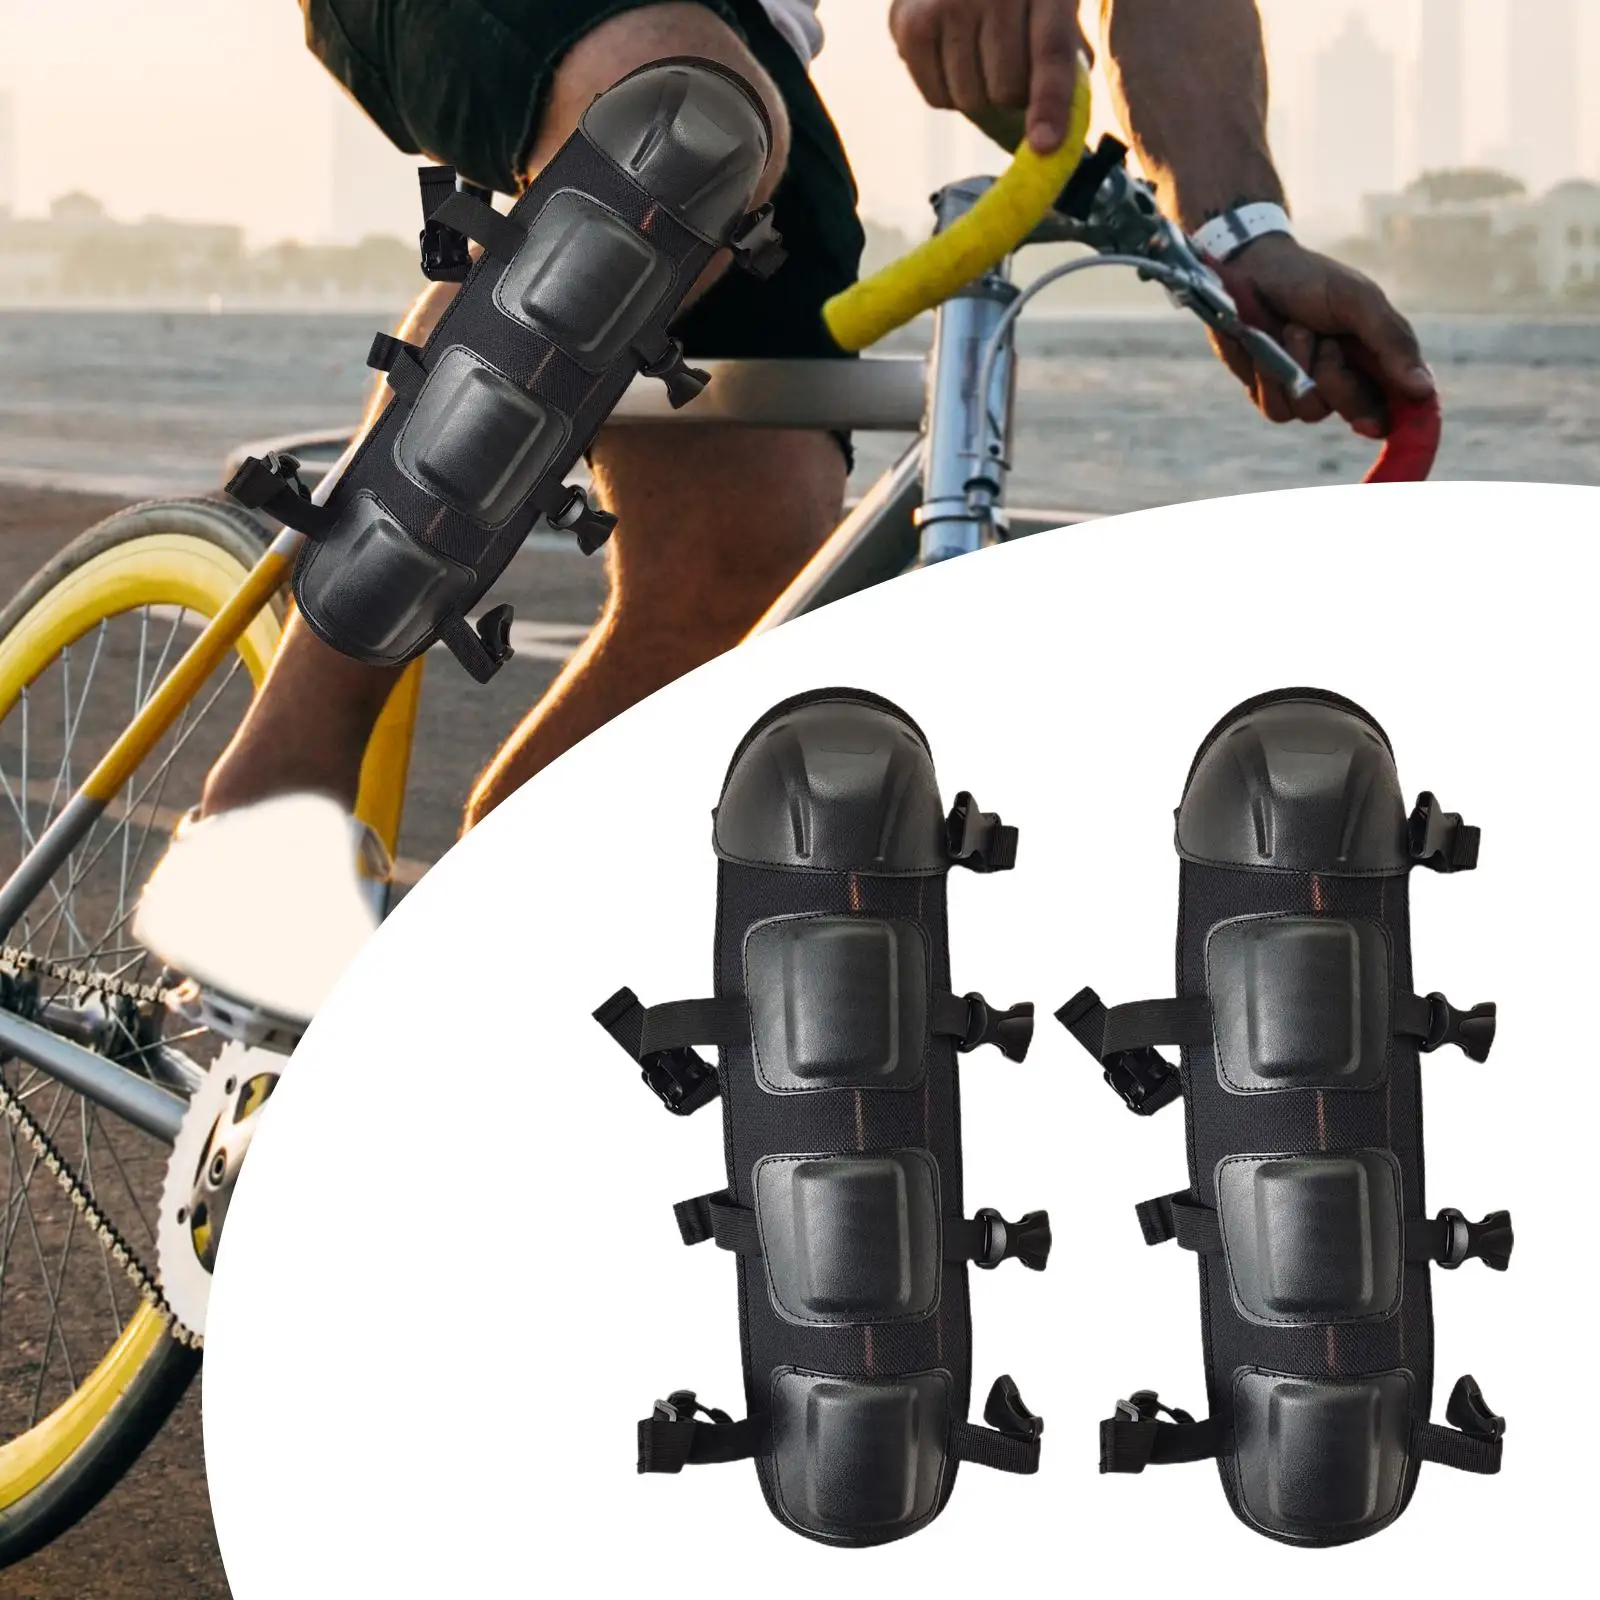 Work Knee Pads Kneelet Protective Gear Heavy Duty Adjustable Shock Cushioning Motorcycle Bike Equipment for Work Safety Supplies